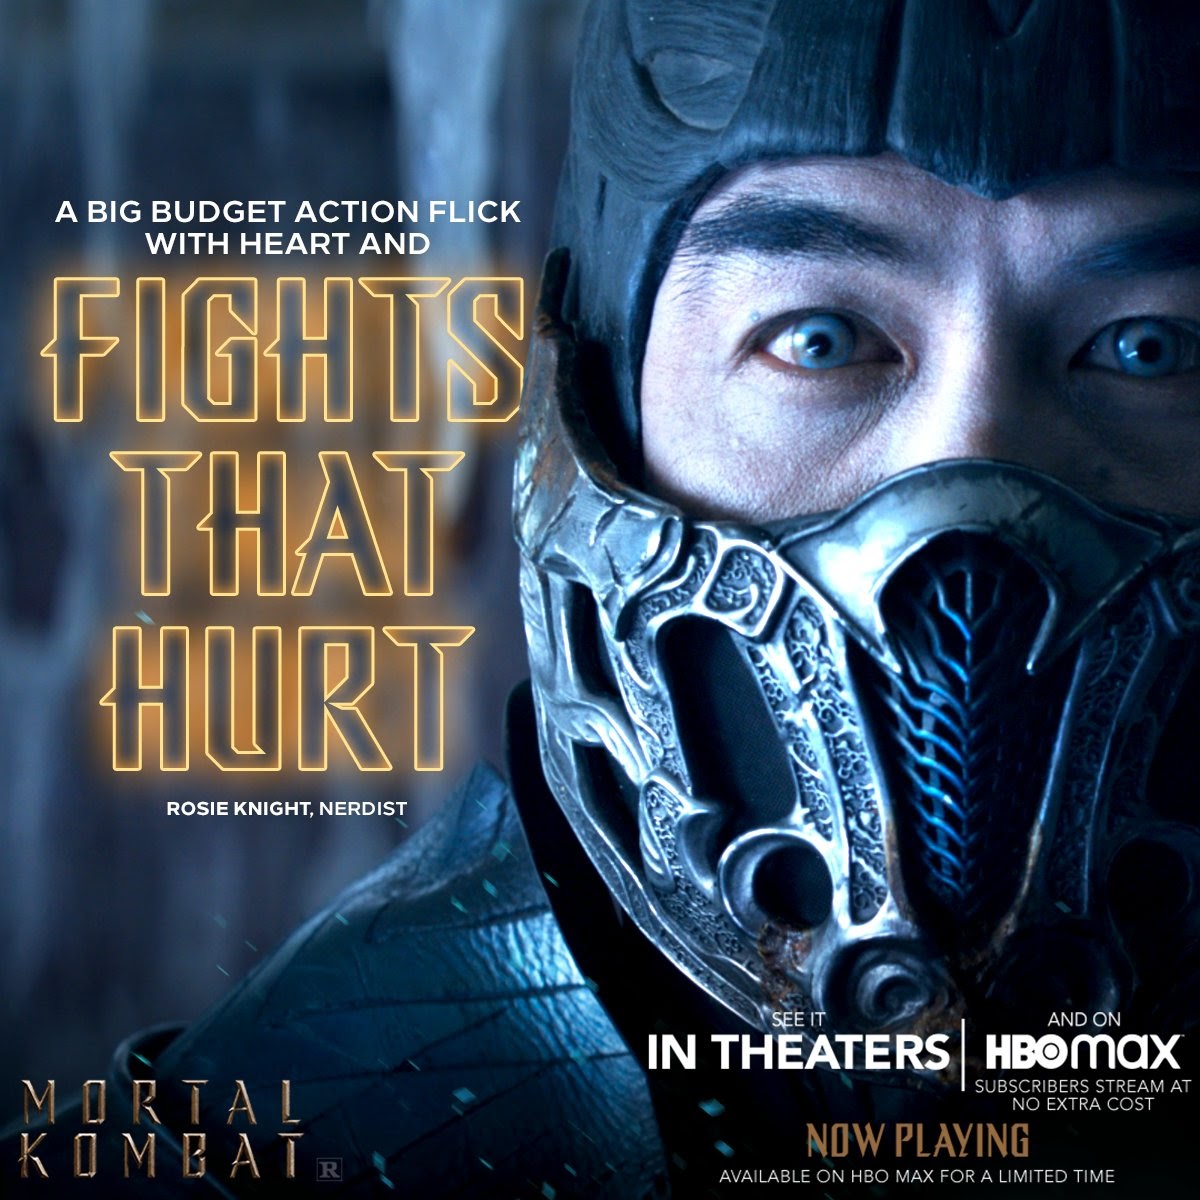 The new Mortal Kombat (2021) movie is NOW PLAYING!